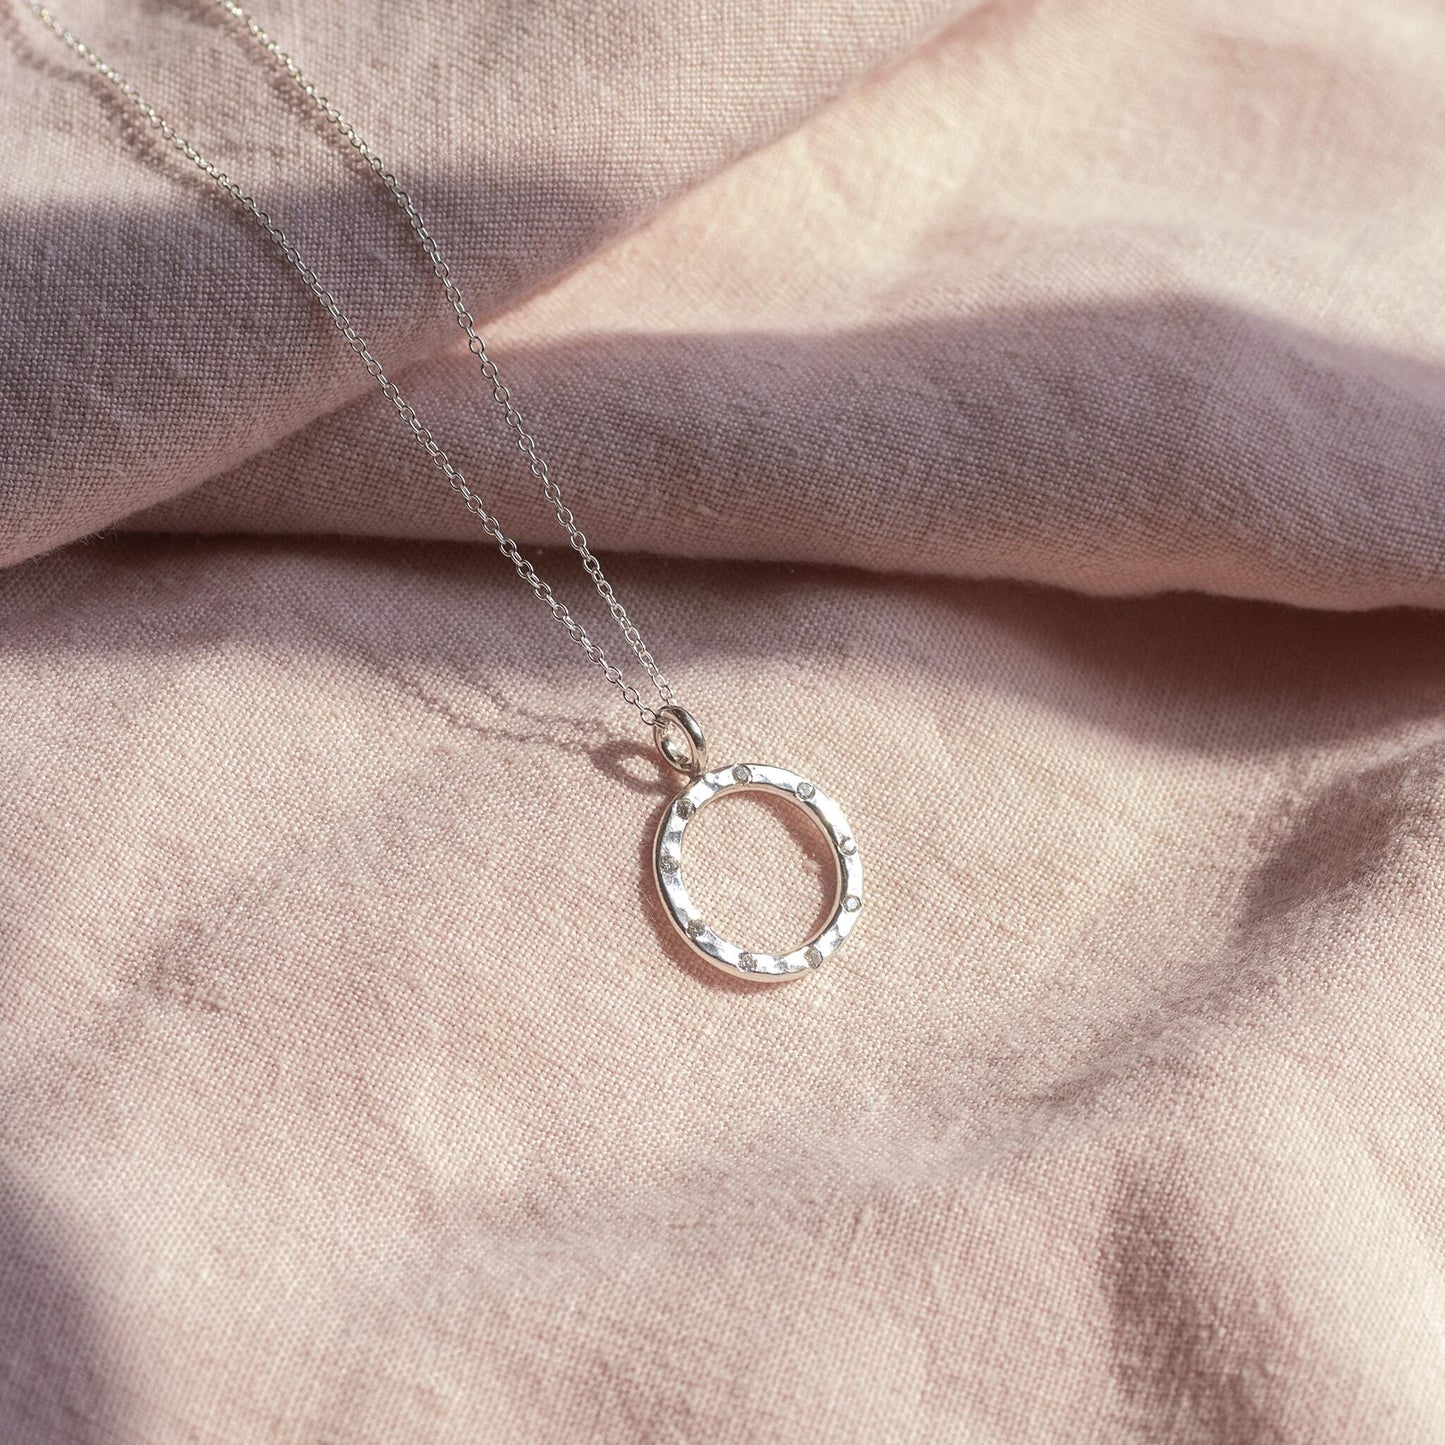 10th Anniversary Gift - Silver Diamond Halo Necklace - 10 Diamonds for 10 Years